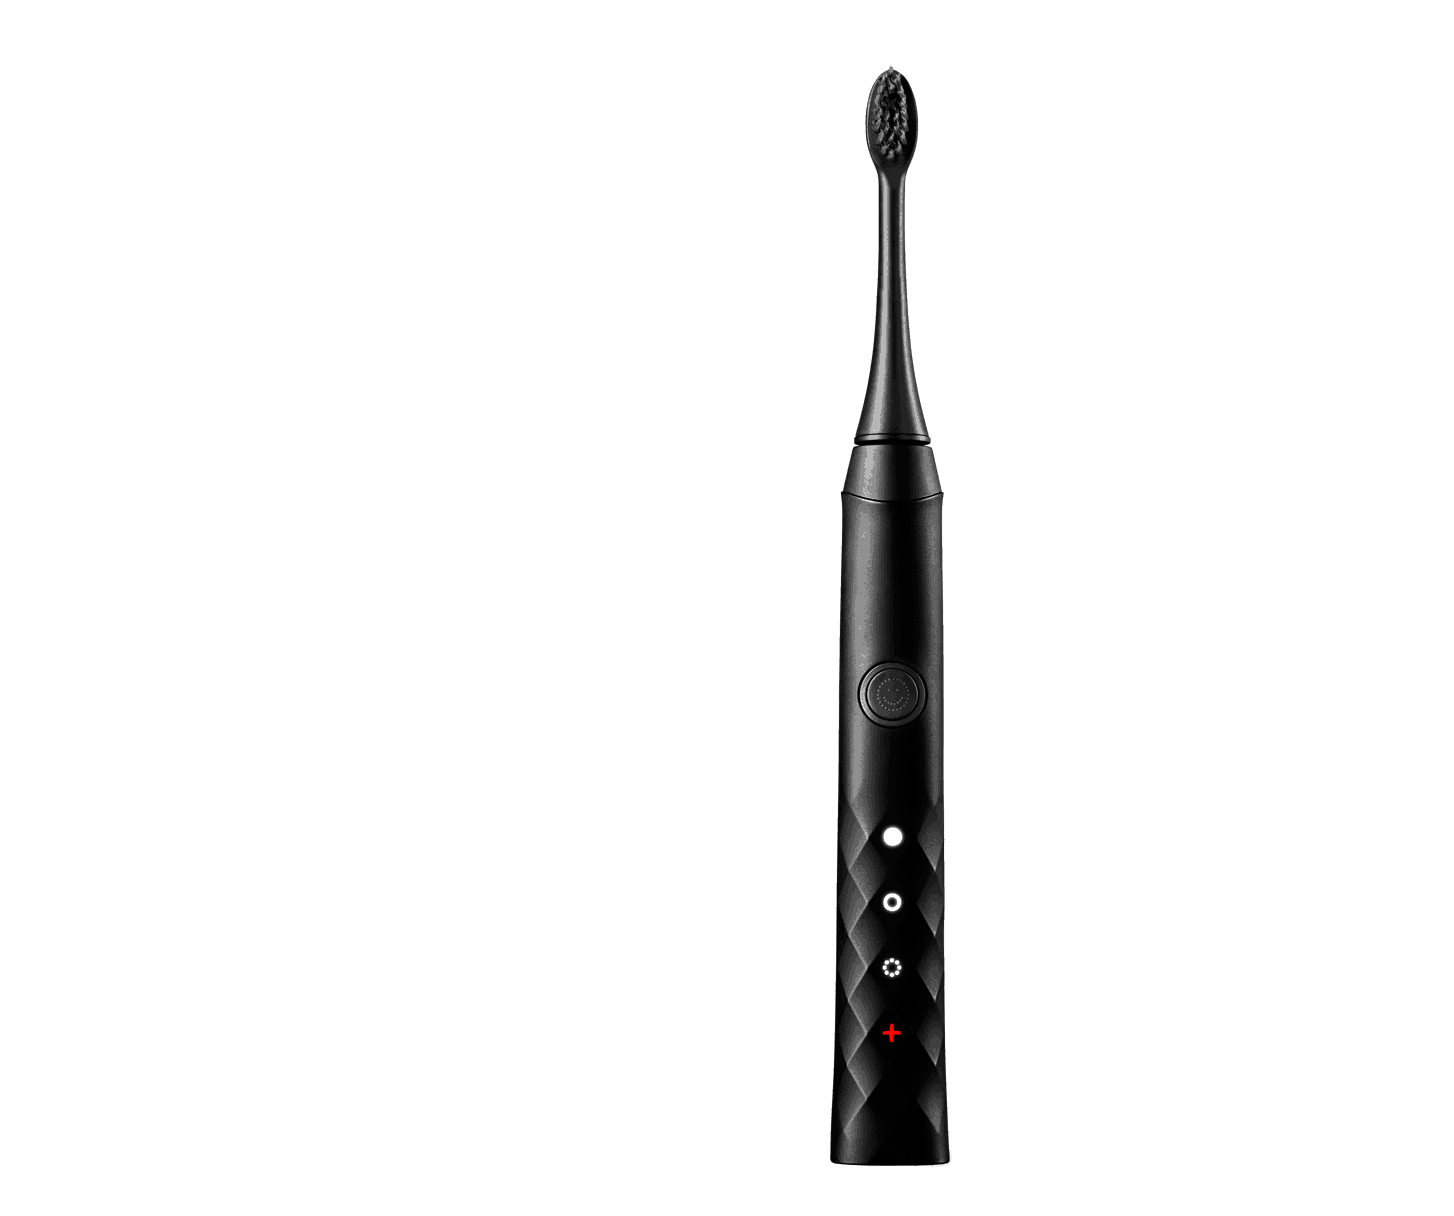 BURST Sonic Toothbrush Review: Can It Keep Up with a Sonicare?